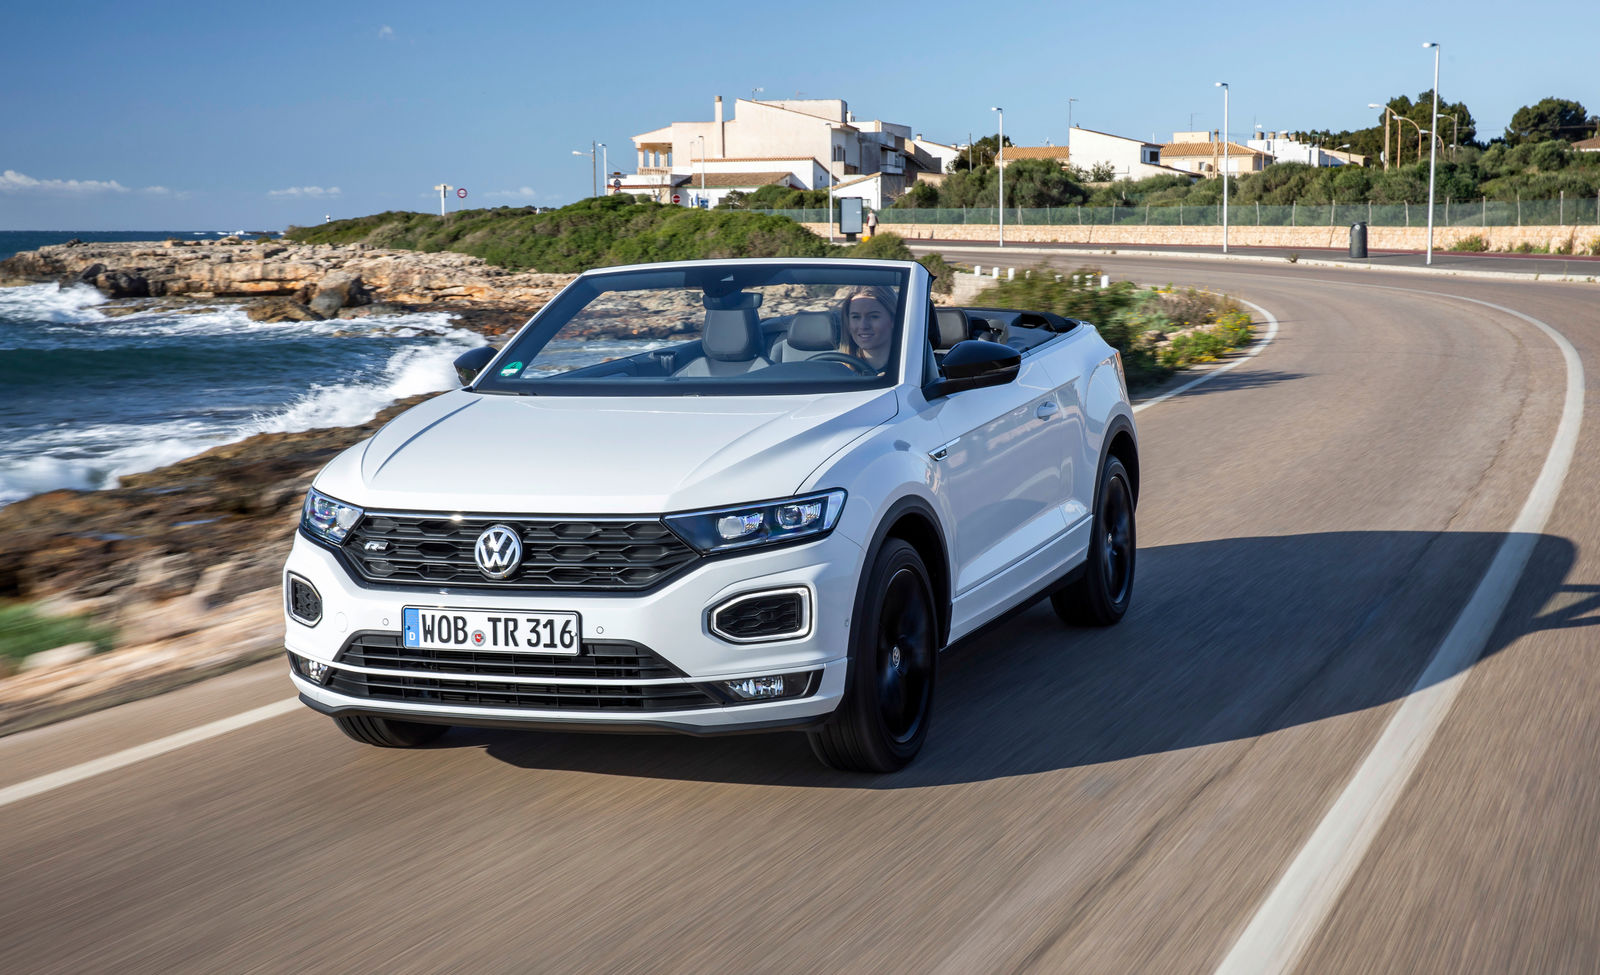 Volkswagen launches the all-new T-Roc Cabriolet